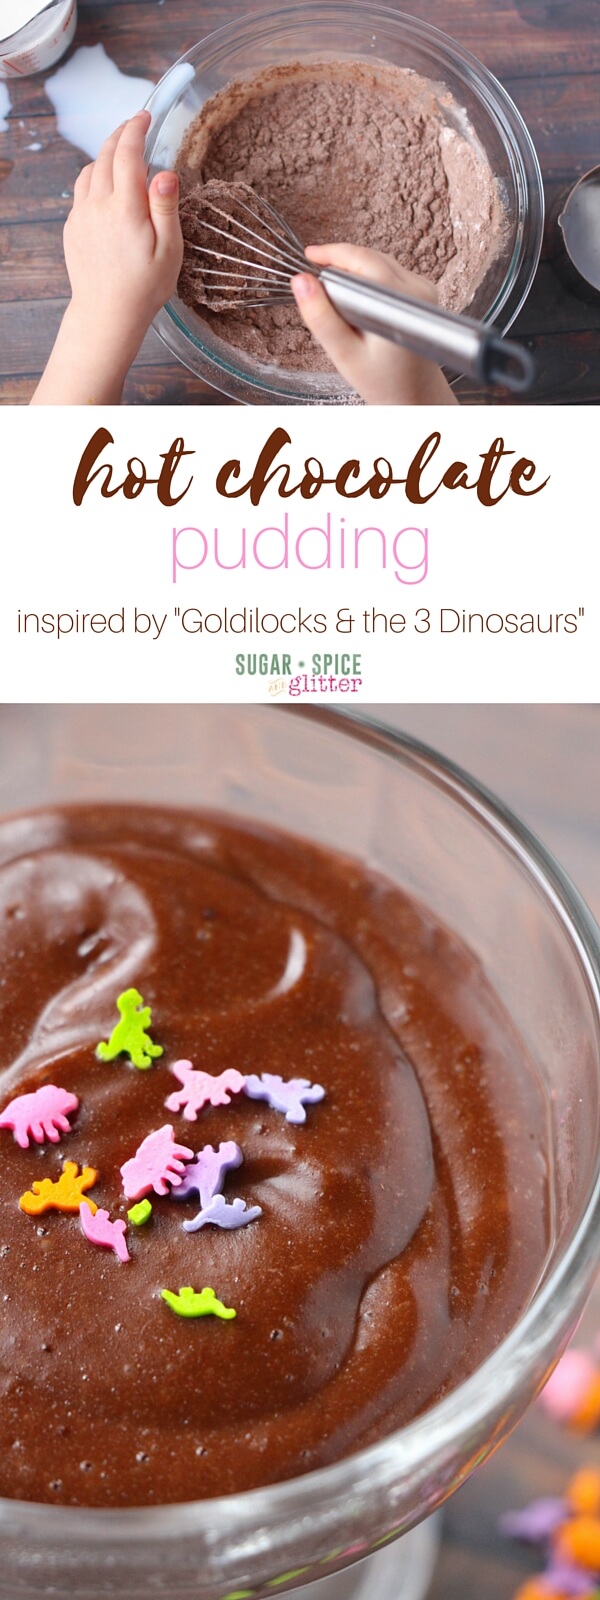 A delicious twist on homemade pudding, this hot chocolate pudding uses 3 ingredients to make luscious, warm chocolate pudding out of hot chocolate powder! A super simple recipe for kids to make with just a little bit of help when it comes to the microwave step.